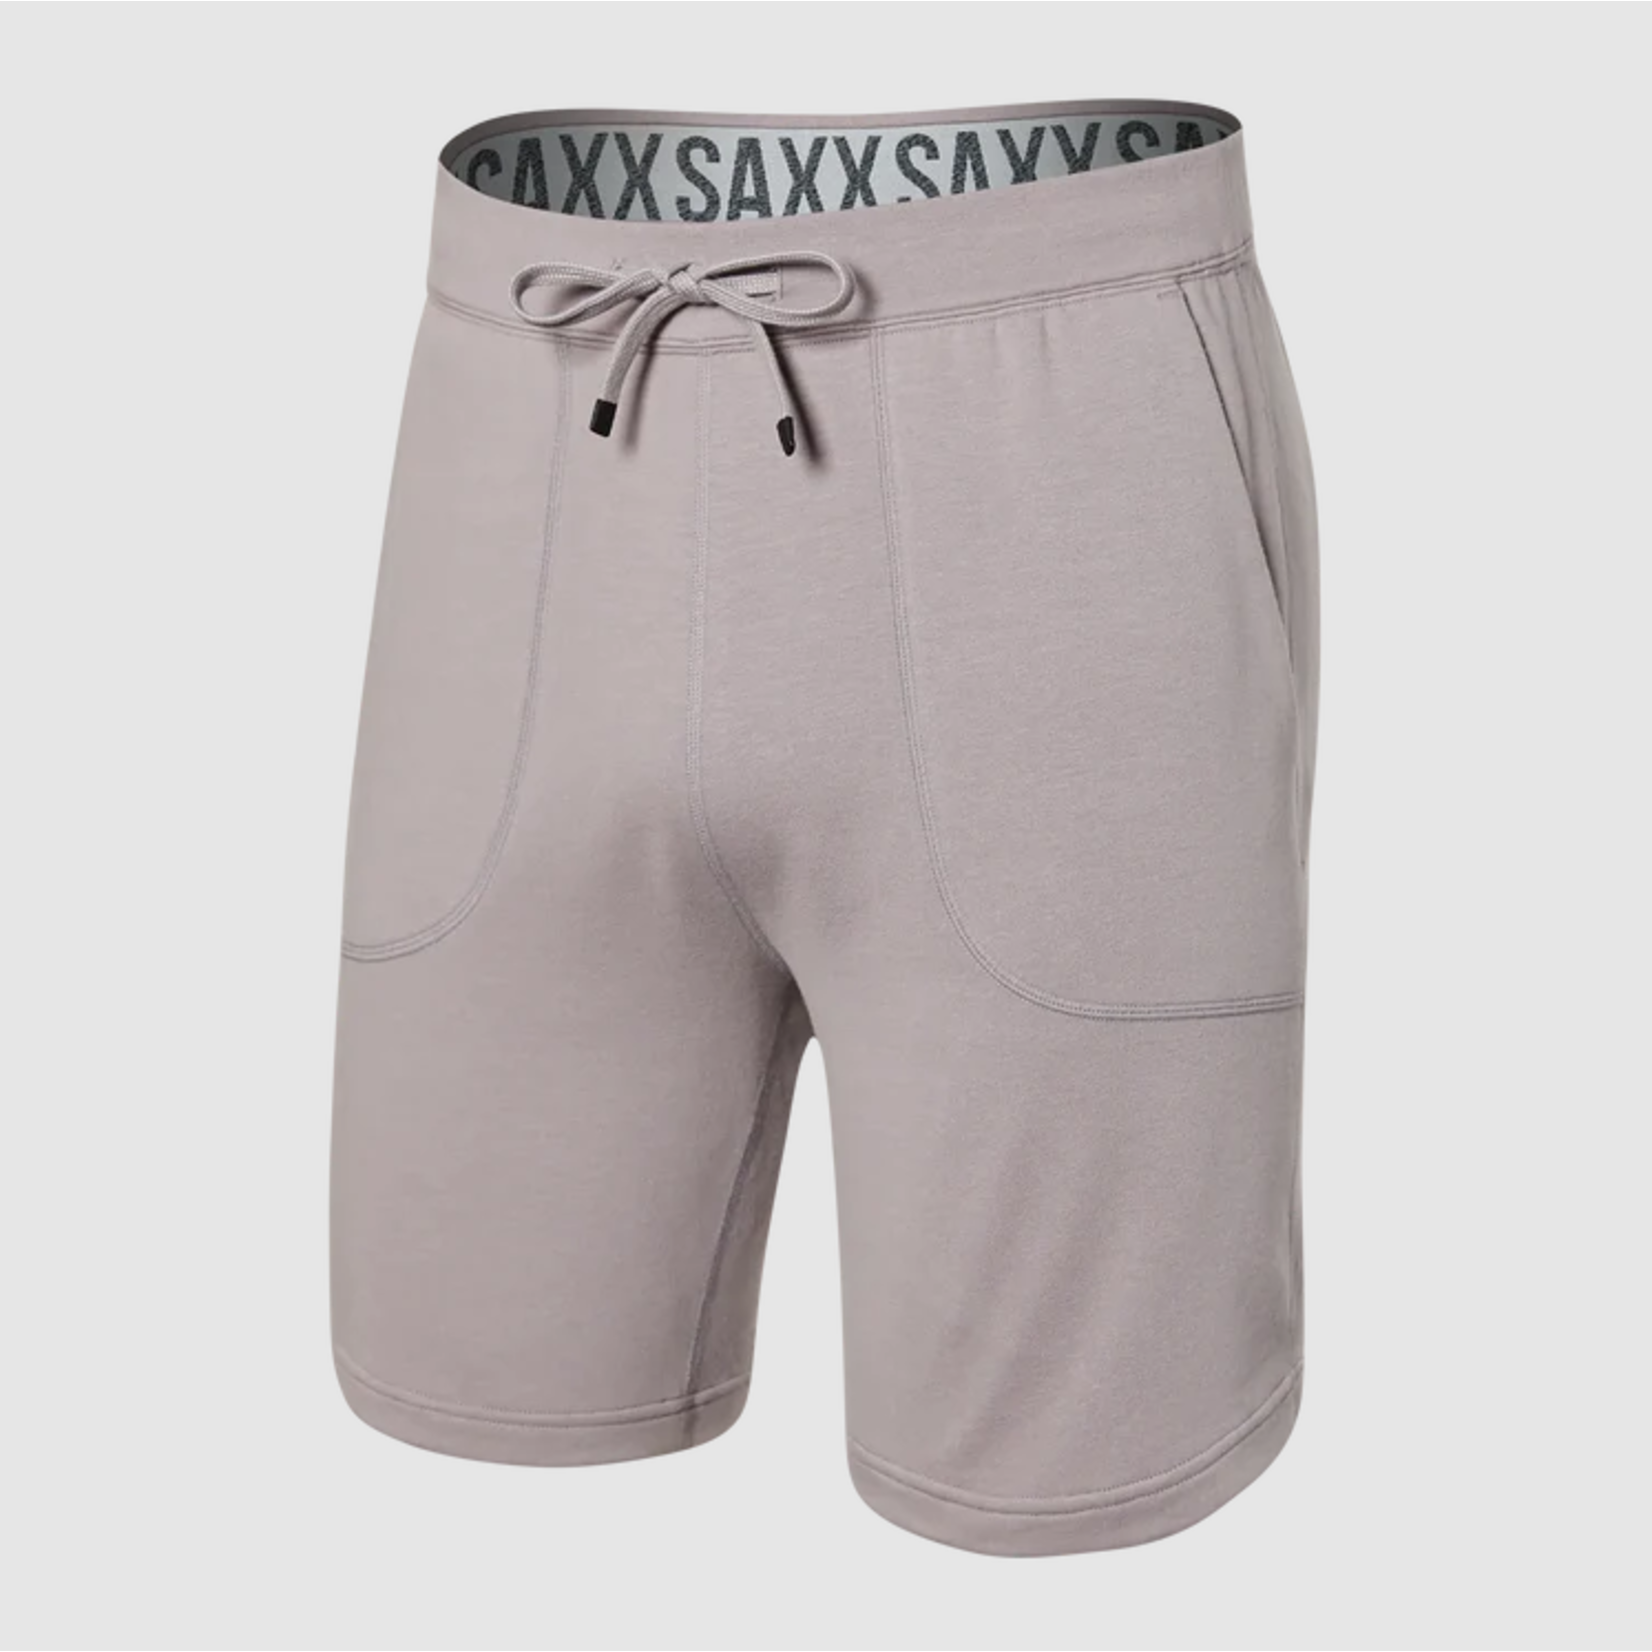 Saxx Shorts, 3Six Five, Mens - Time-Out Sports Excellence